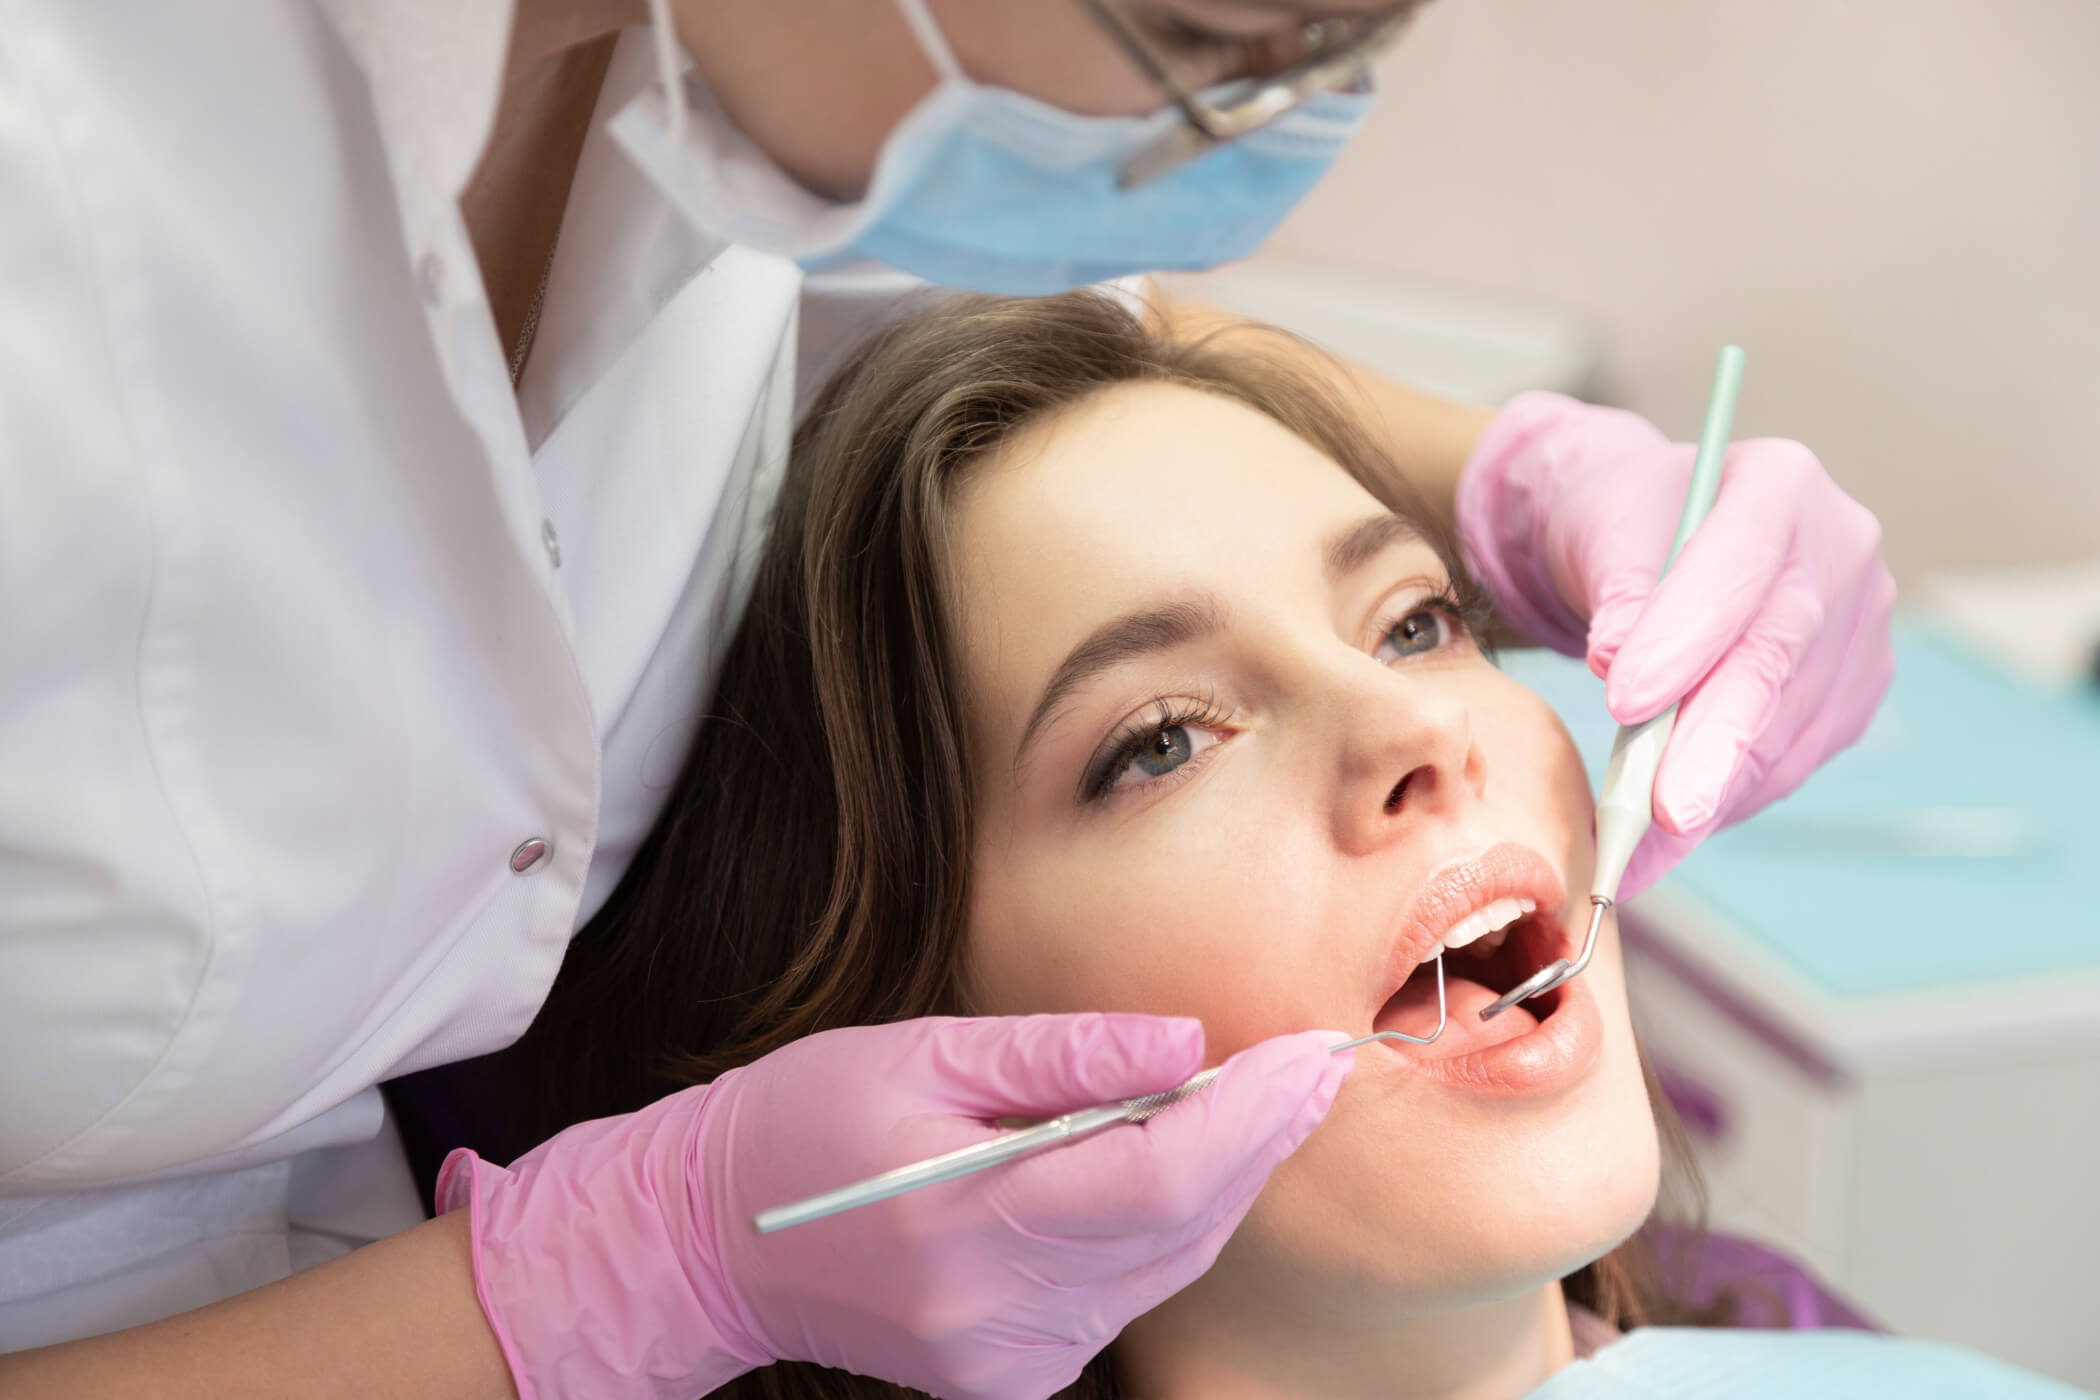 When should a patient be referred to a periodontist?